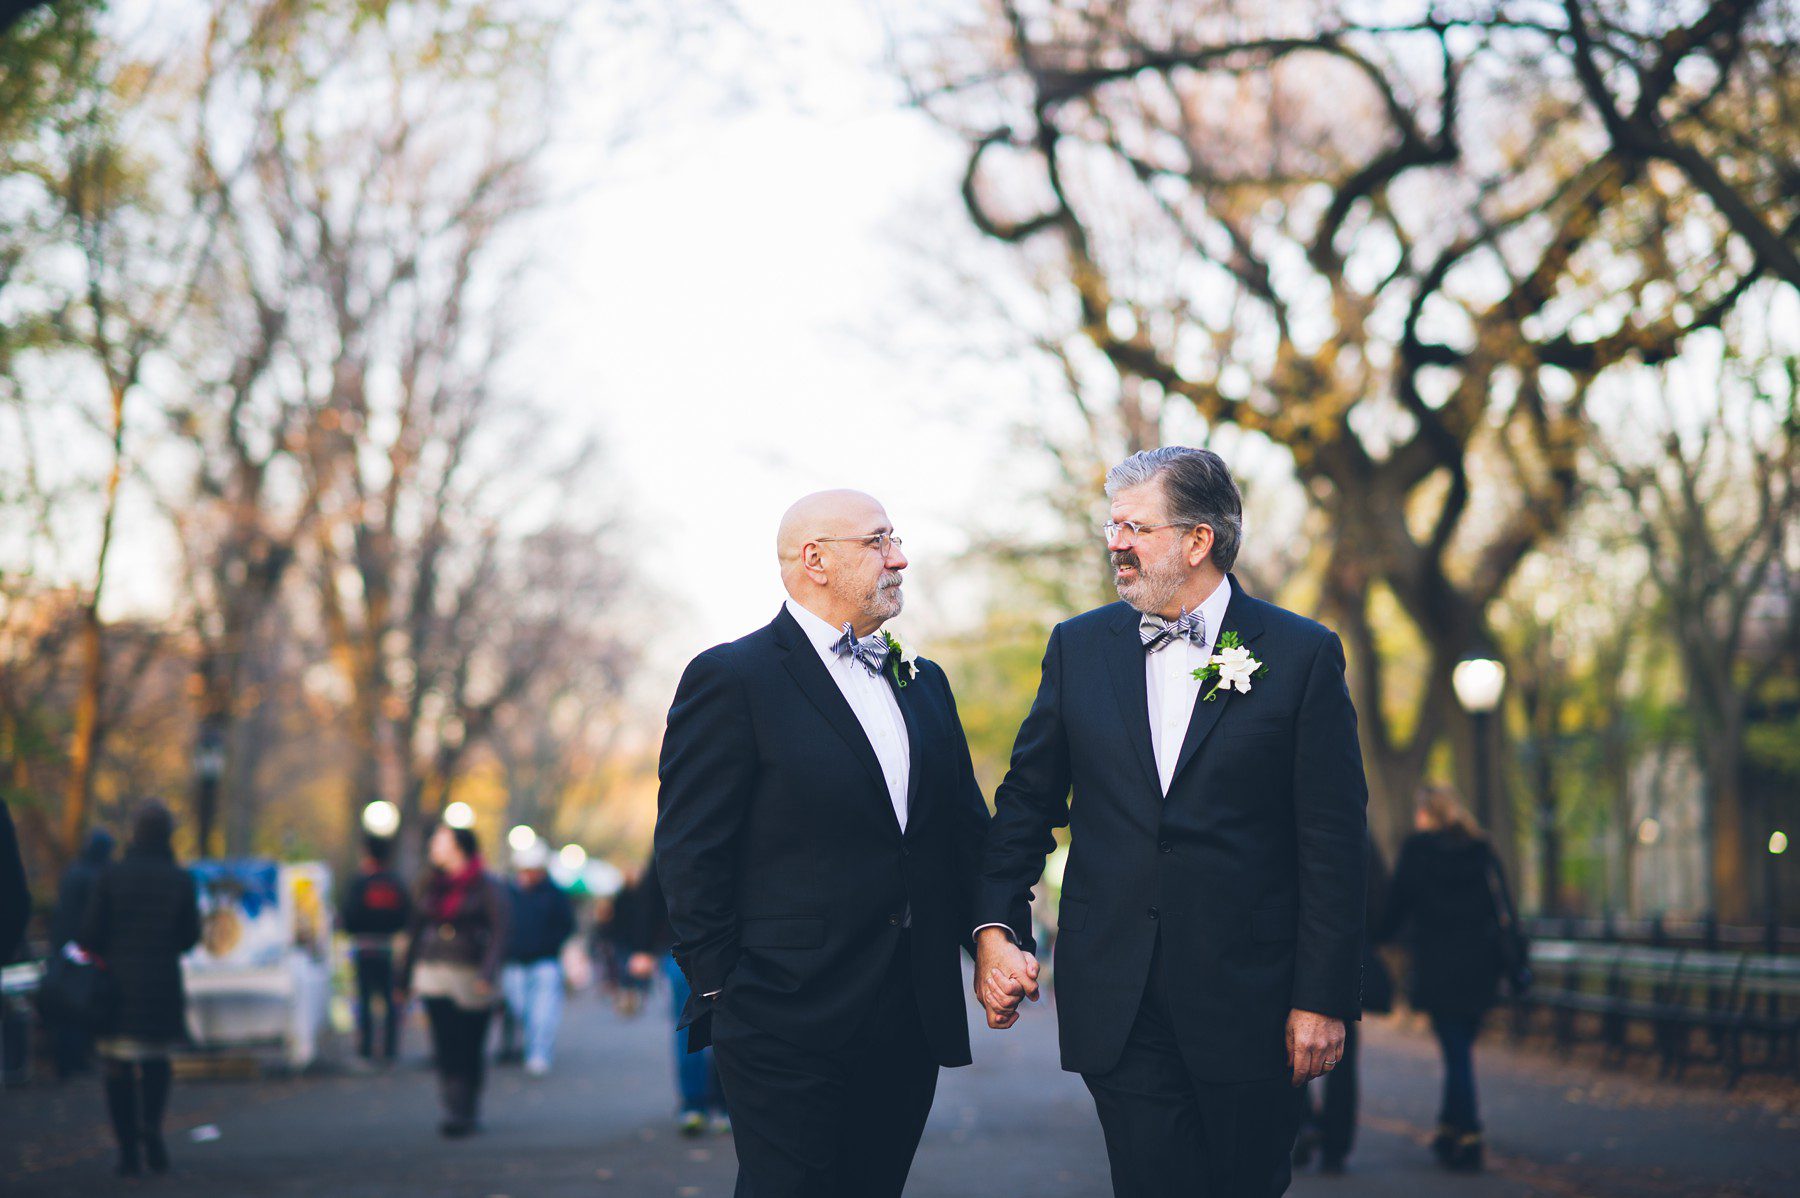 marriage equality wedding in central park